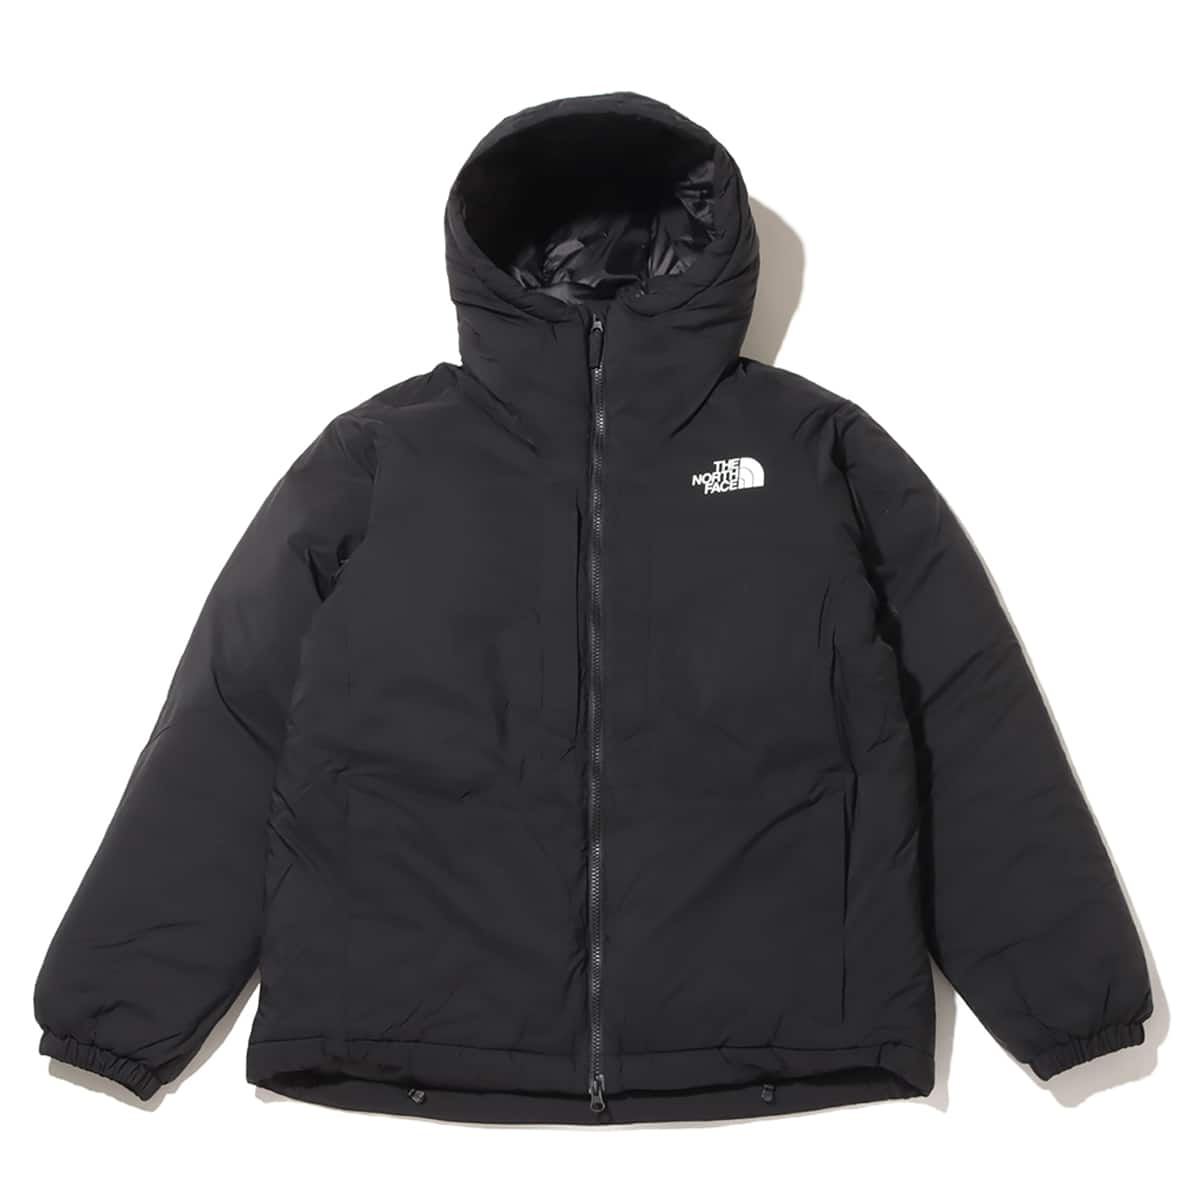 THE NORTH FACE PROJECT INSULATION JACKET BLACK 23FW-I_photo_large